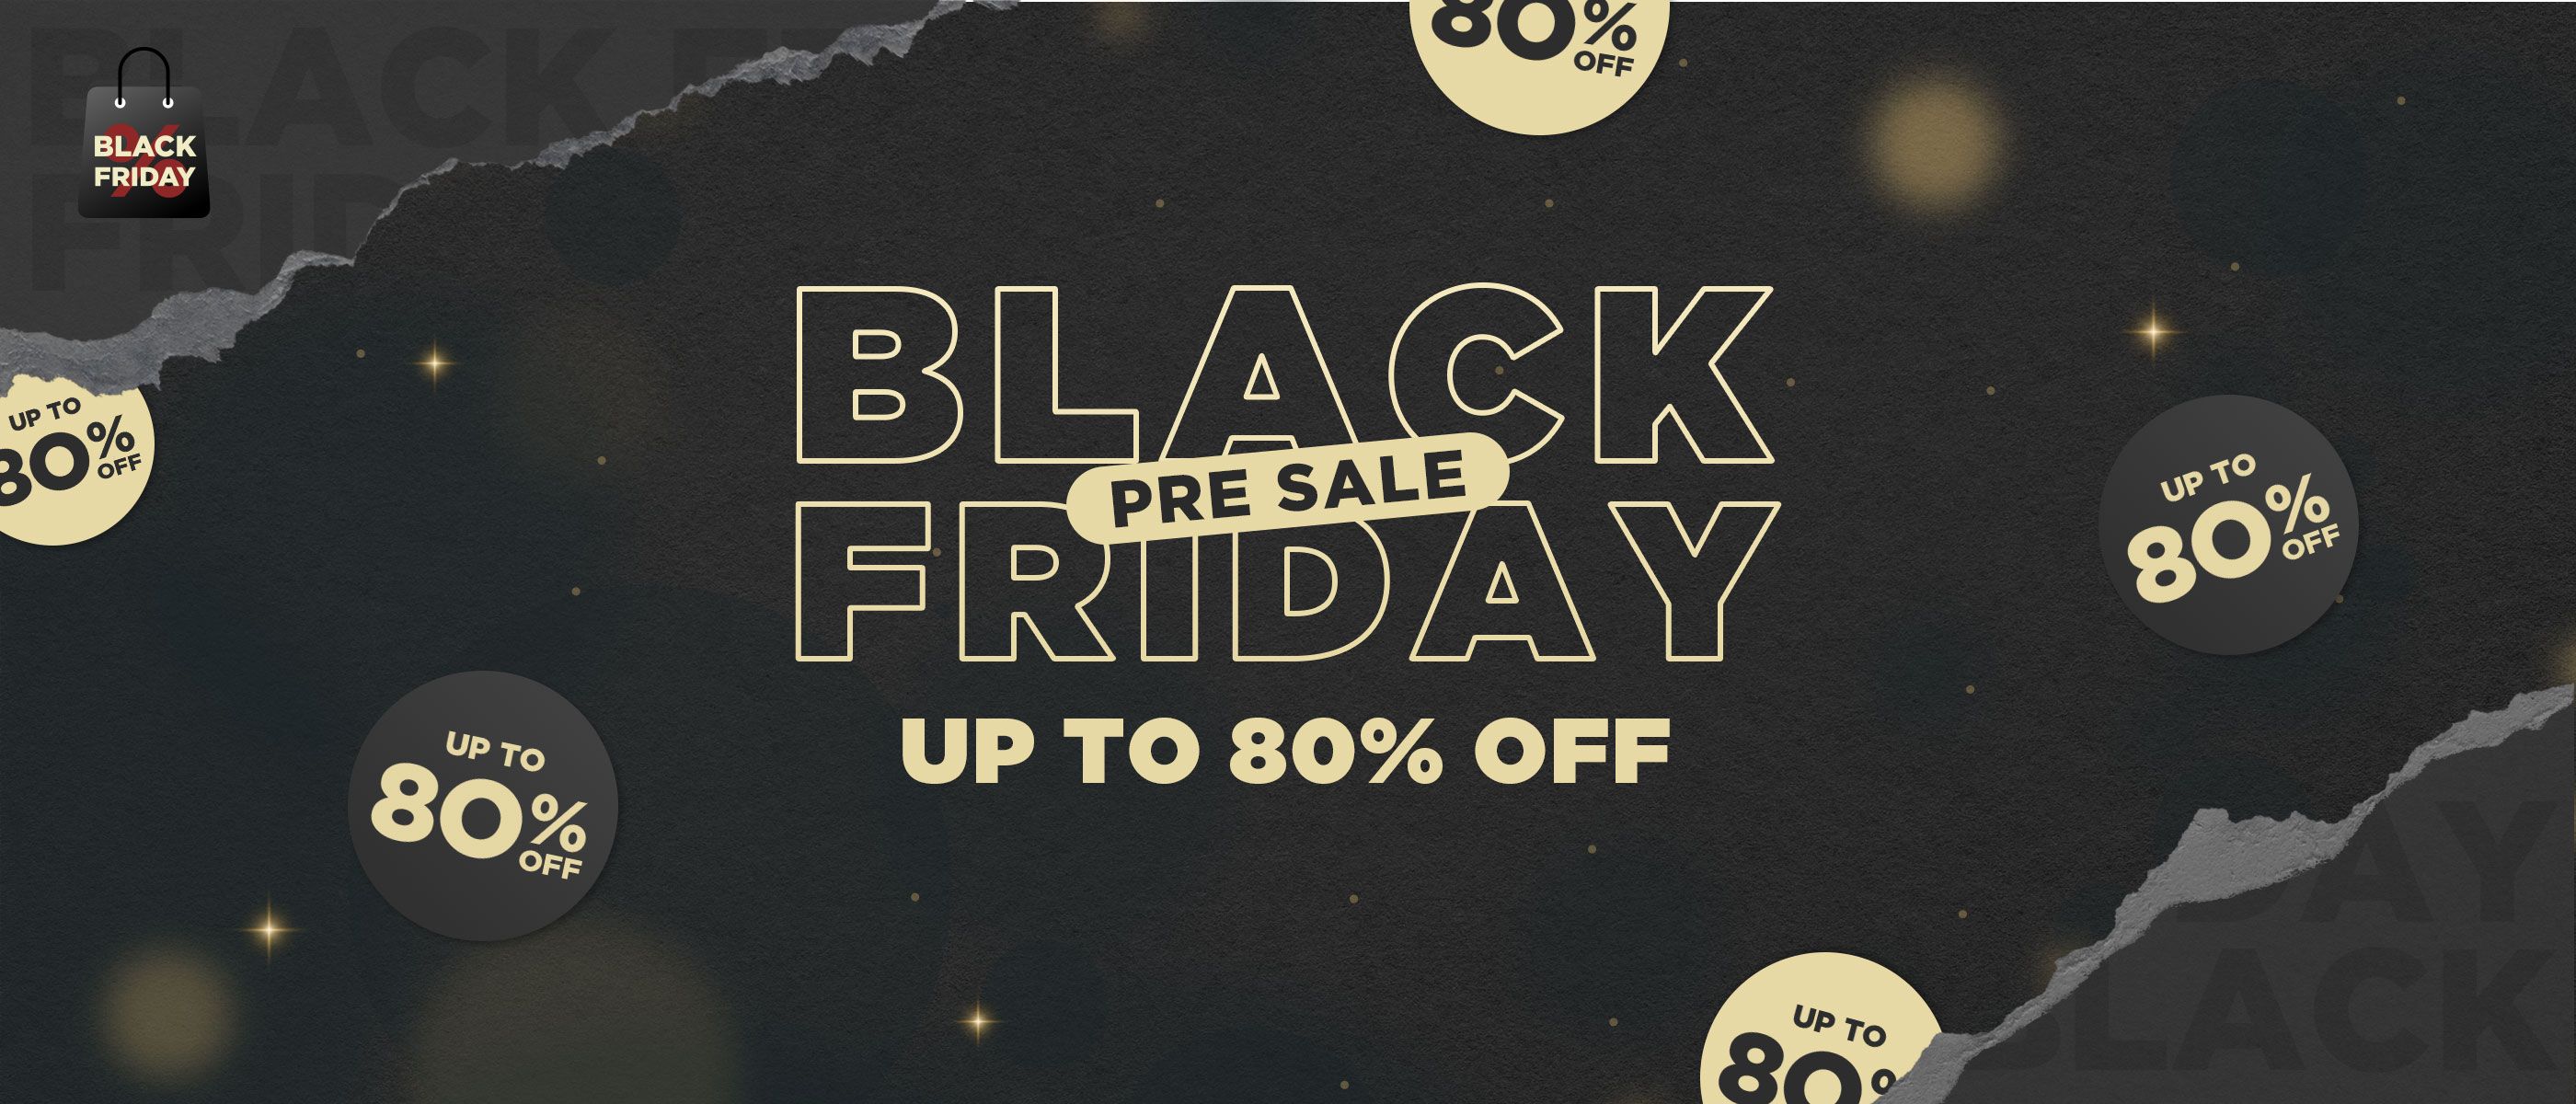 BLACK FRIDAY Pre Sale Up To 80% OFF